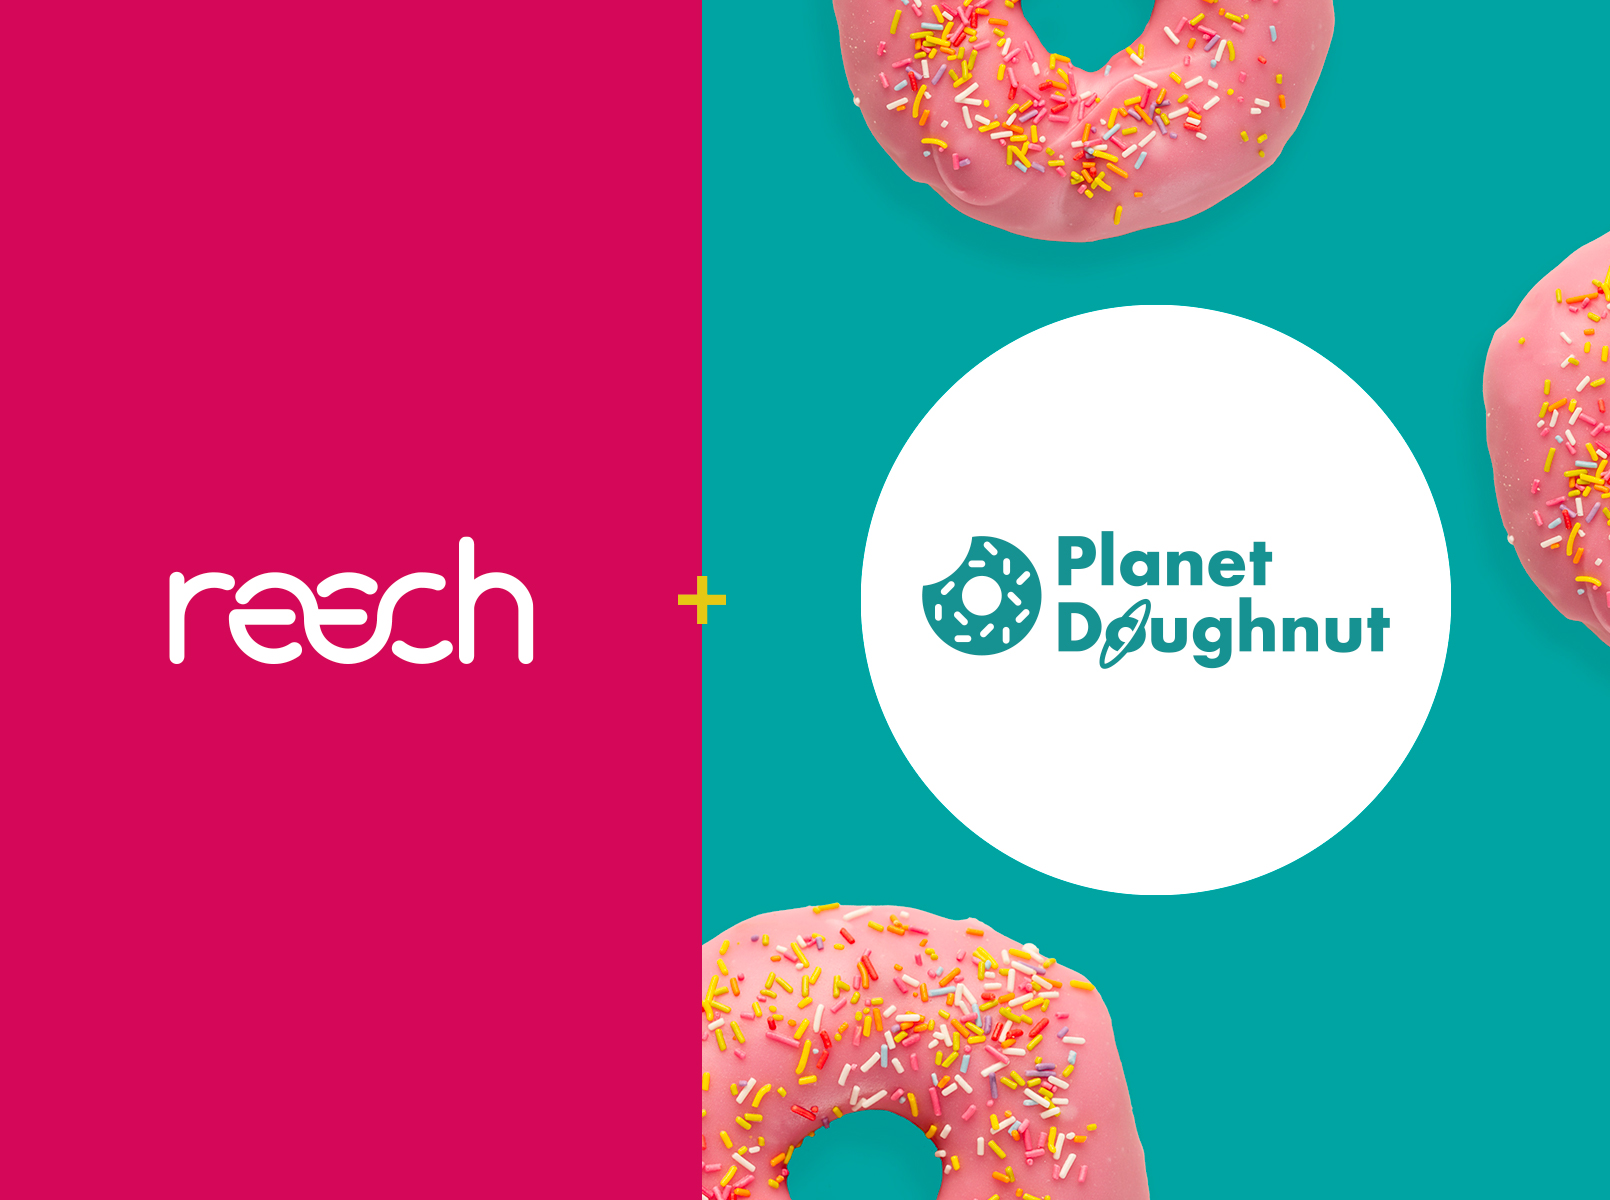 We’re over the moon to partner with Planet Doughnut